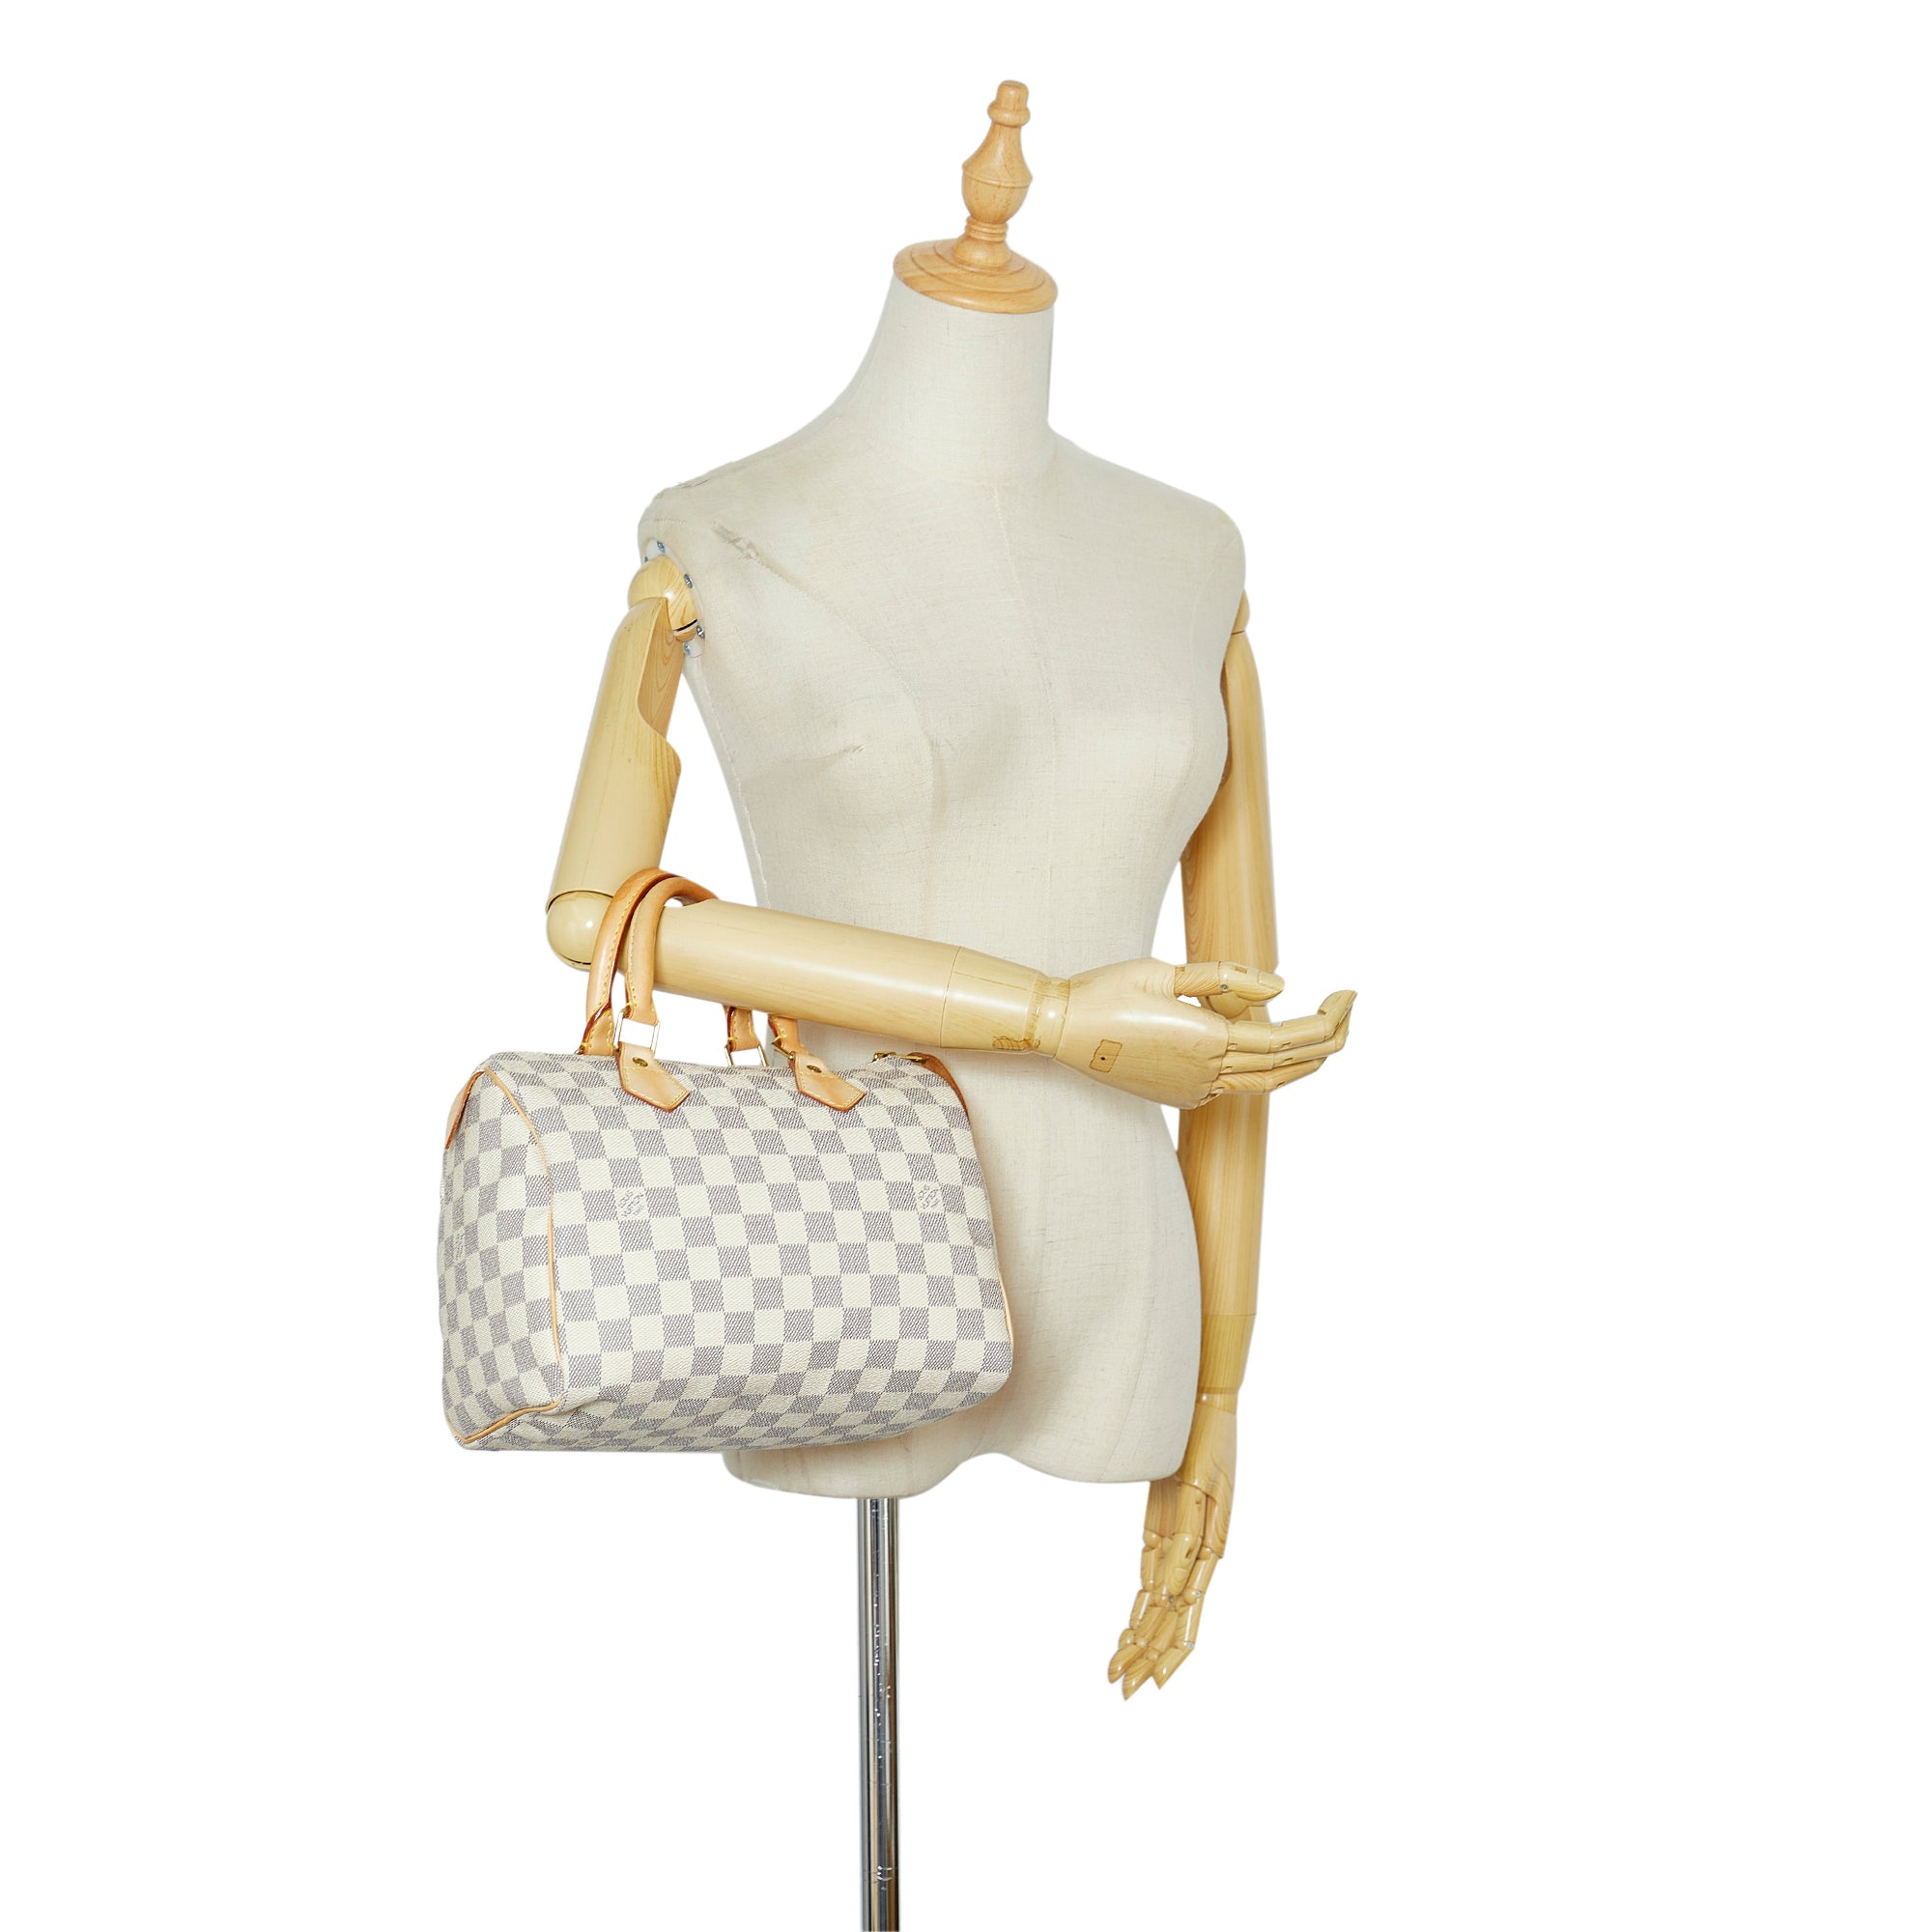 LOUIS VUITTON, Speedy 25 in white damier canvas For Sale at